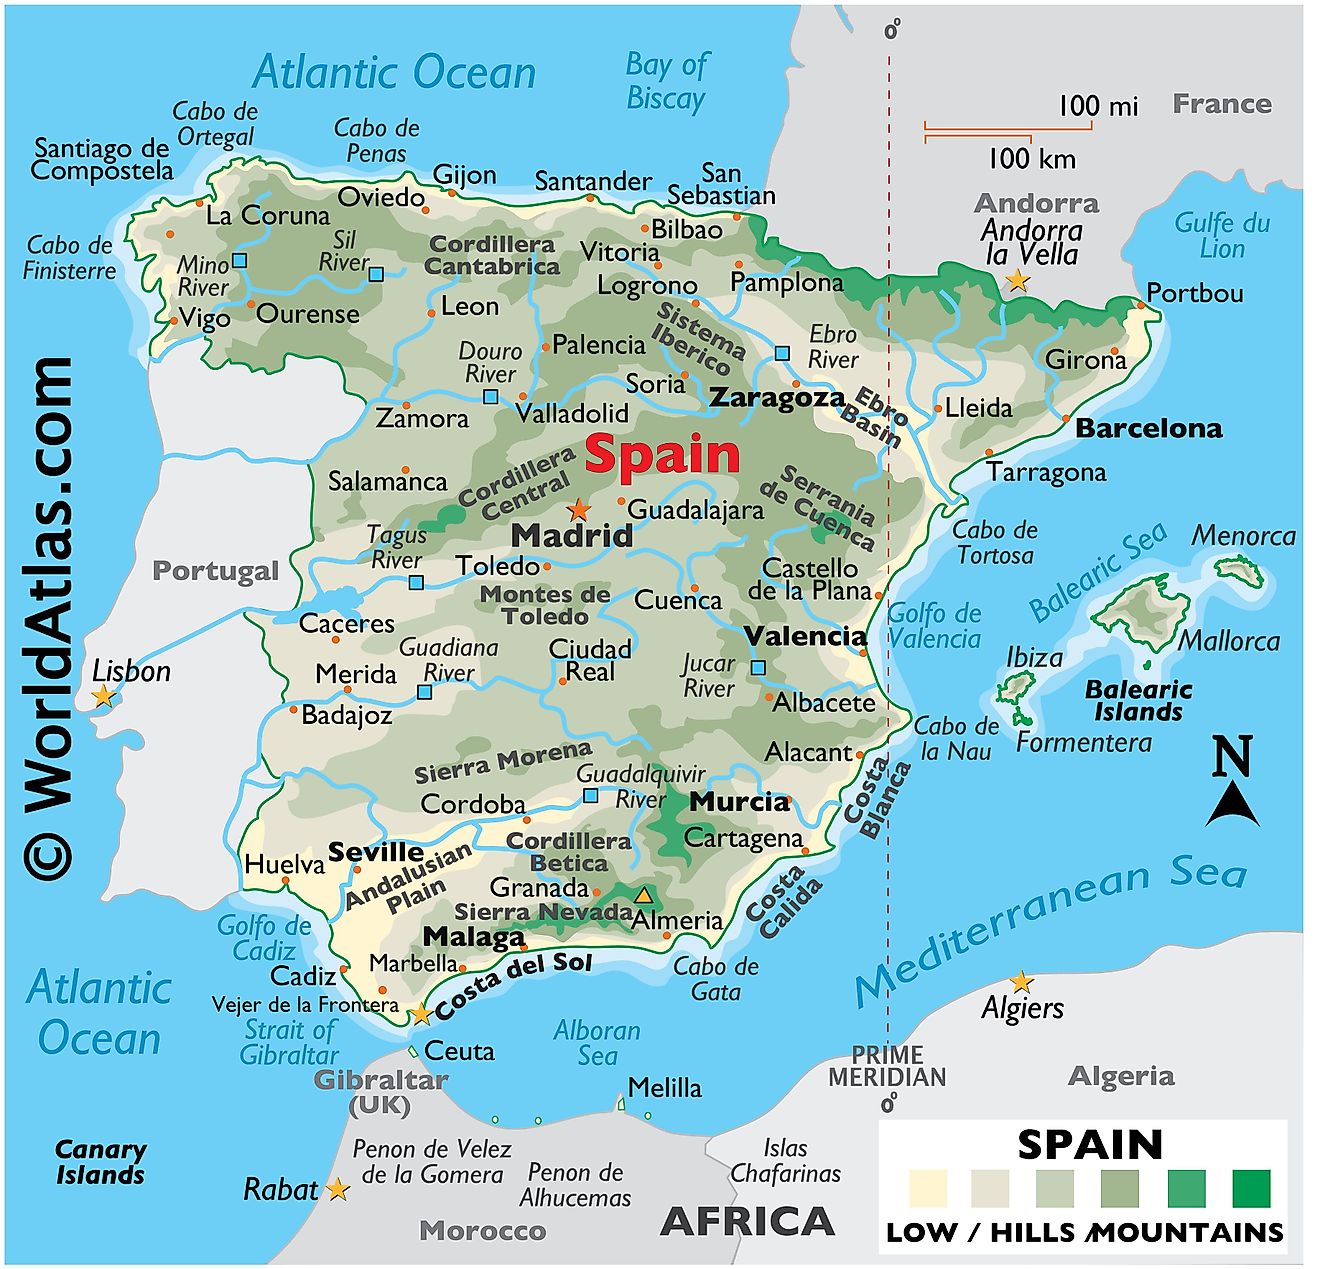 Physical Map of Spain showing its relief, state boundaries, mountains, extreme points, major lakes, rivers, important cities, etc.